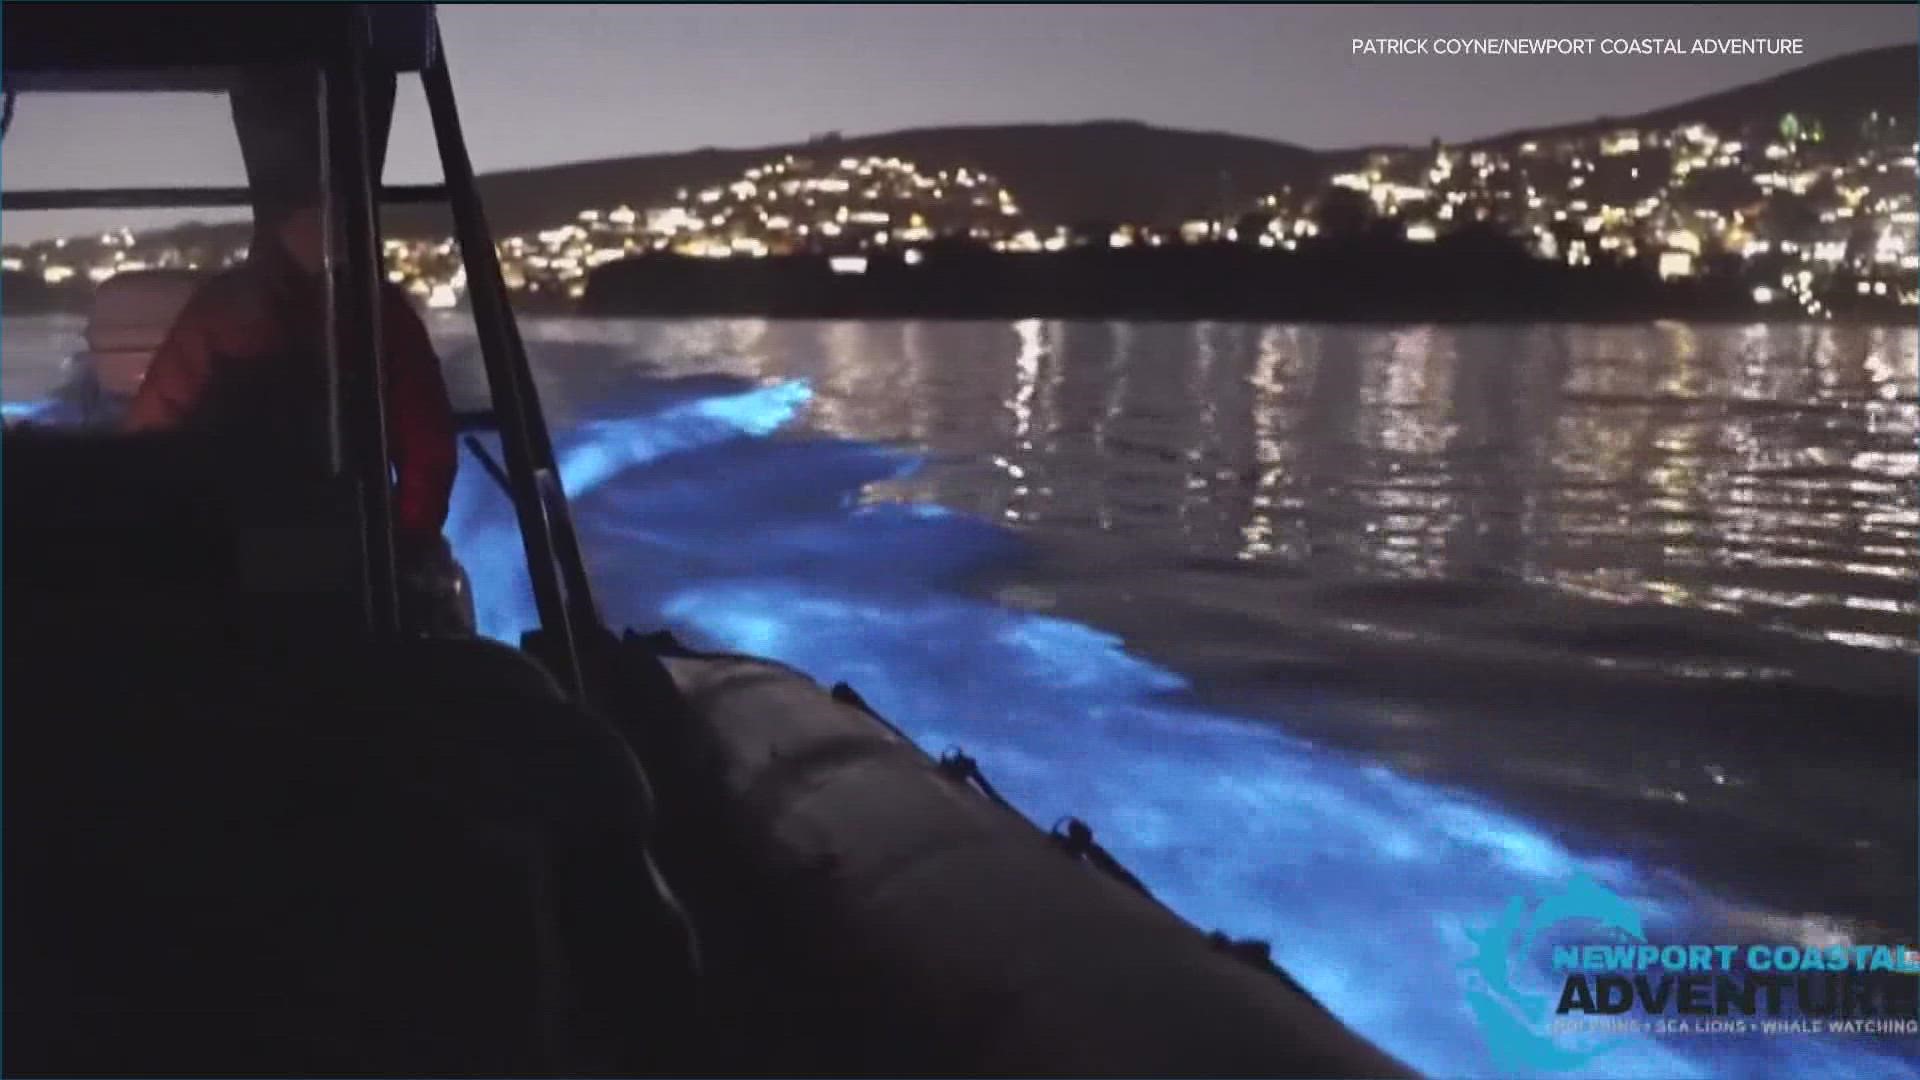 The bioluminescence waves are back in San Diego